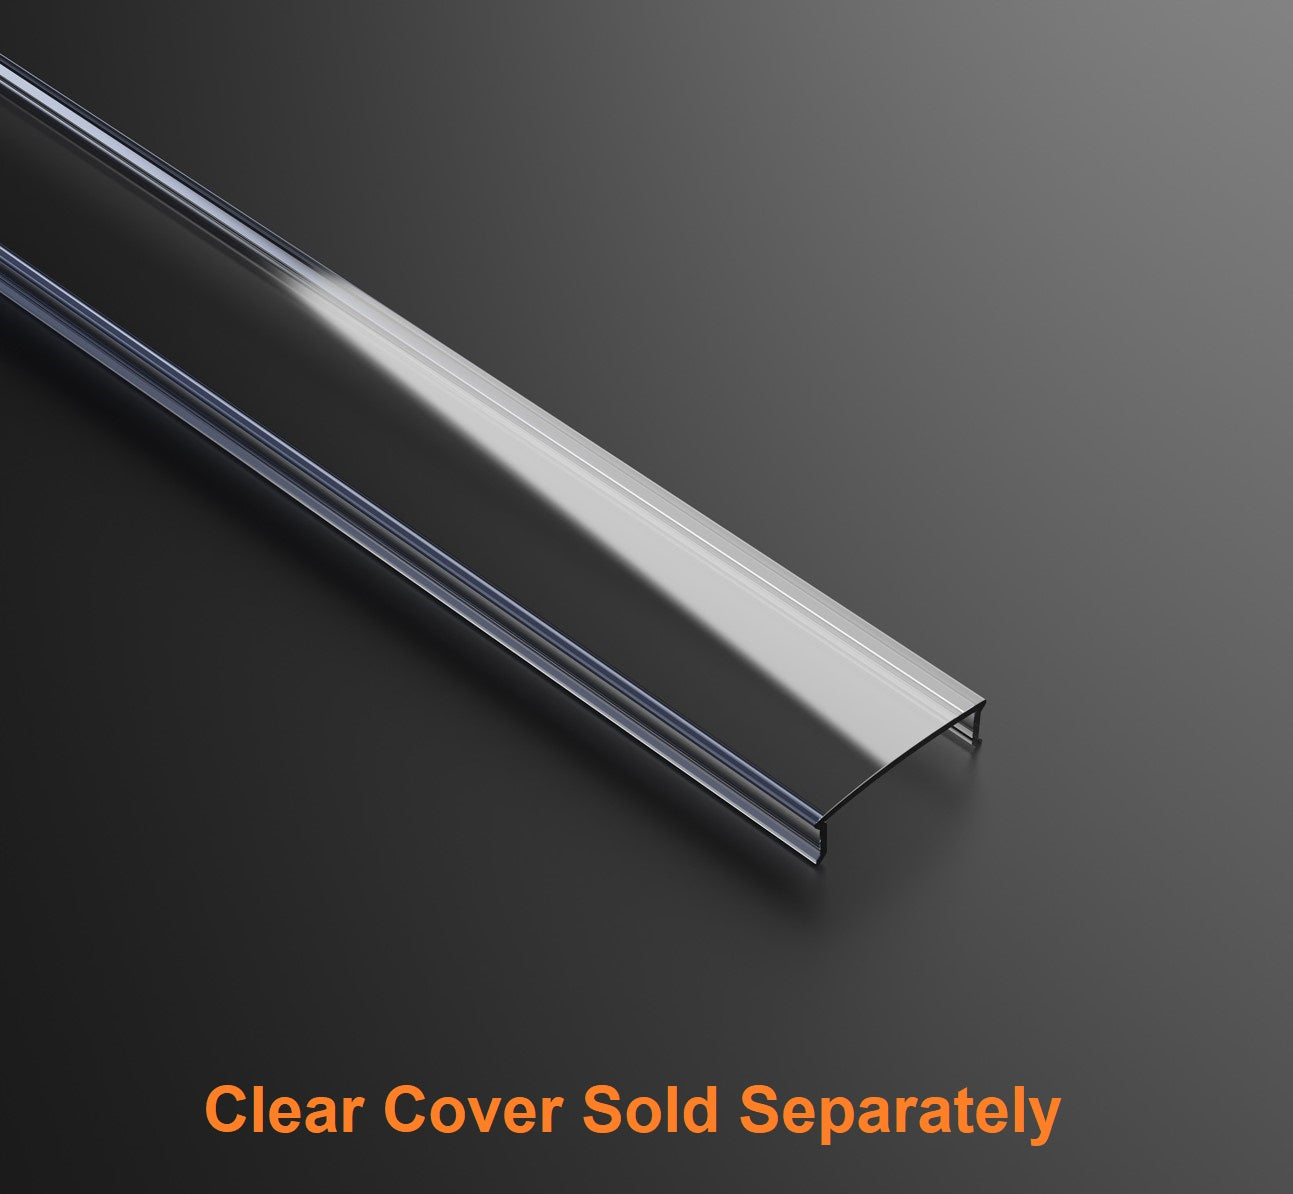 VBD-CH-S5 Low Profile Linear Aluminum Channel 2.4Meters(94.4in) and 3Meters(118in), Veroboard